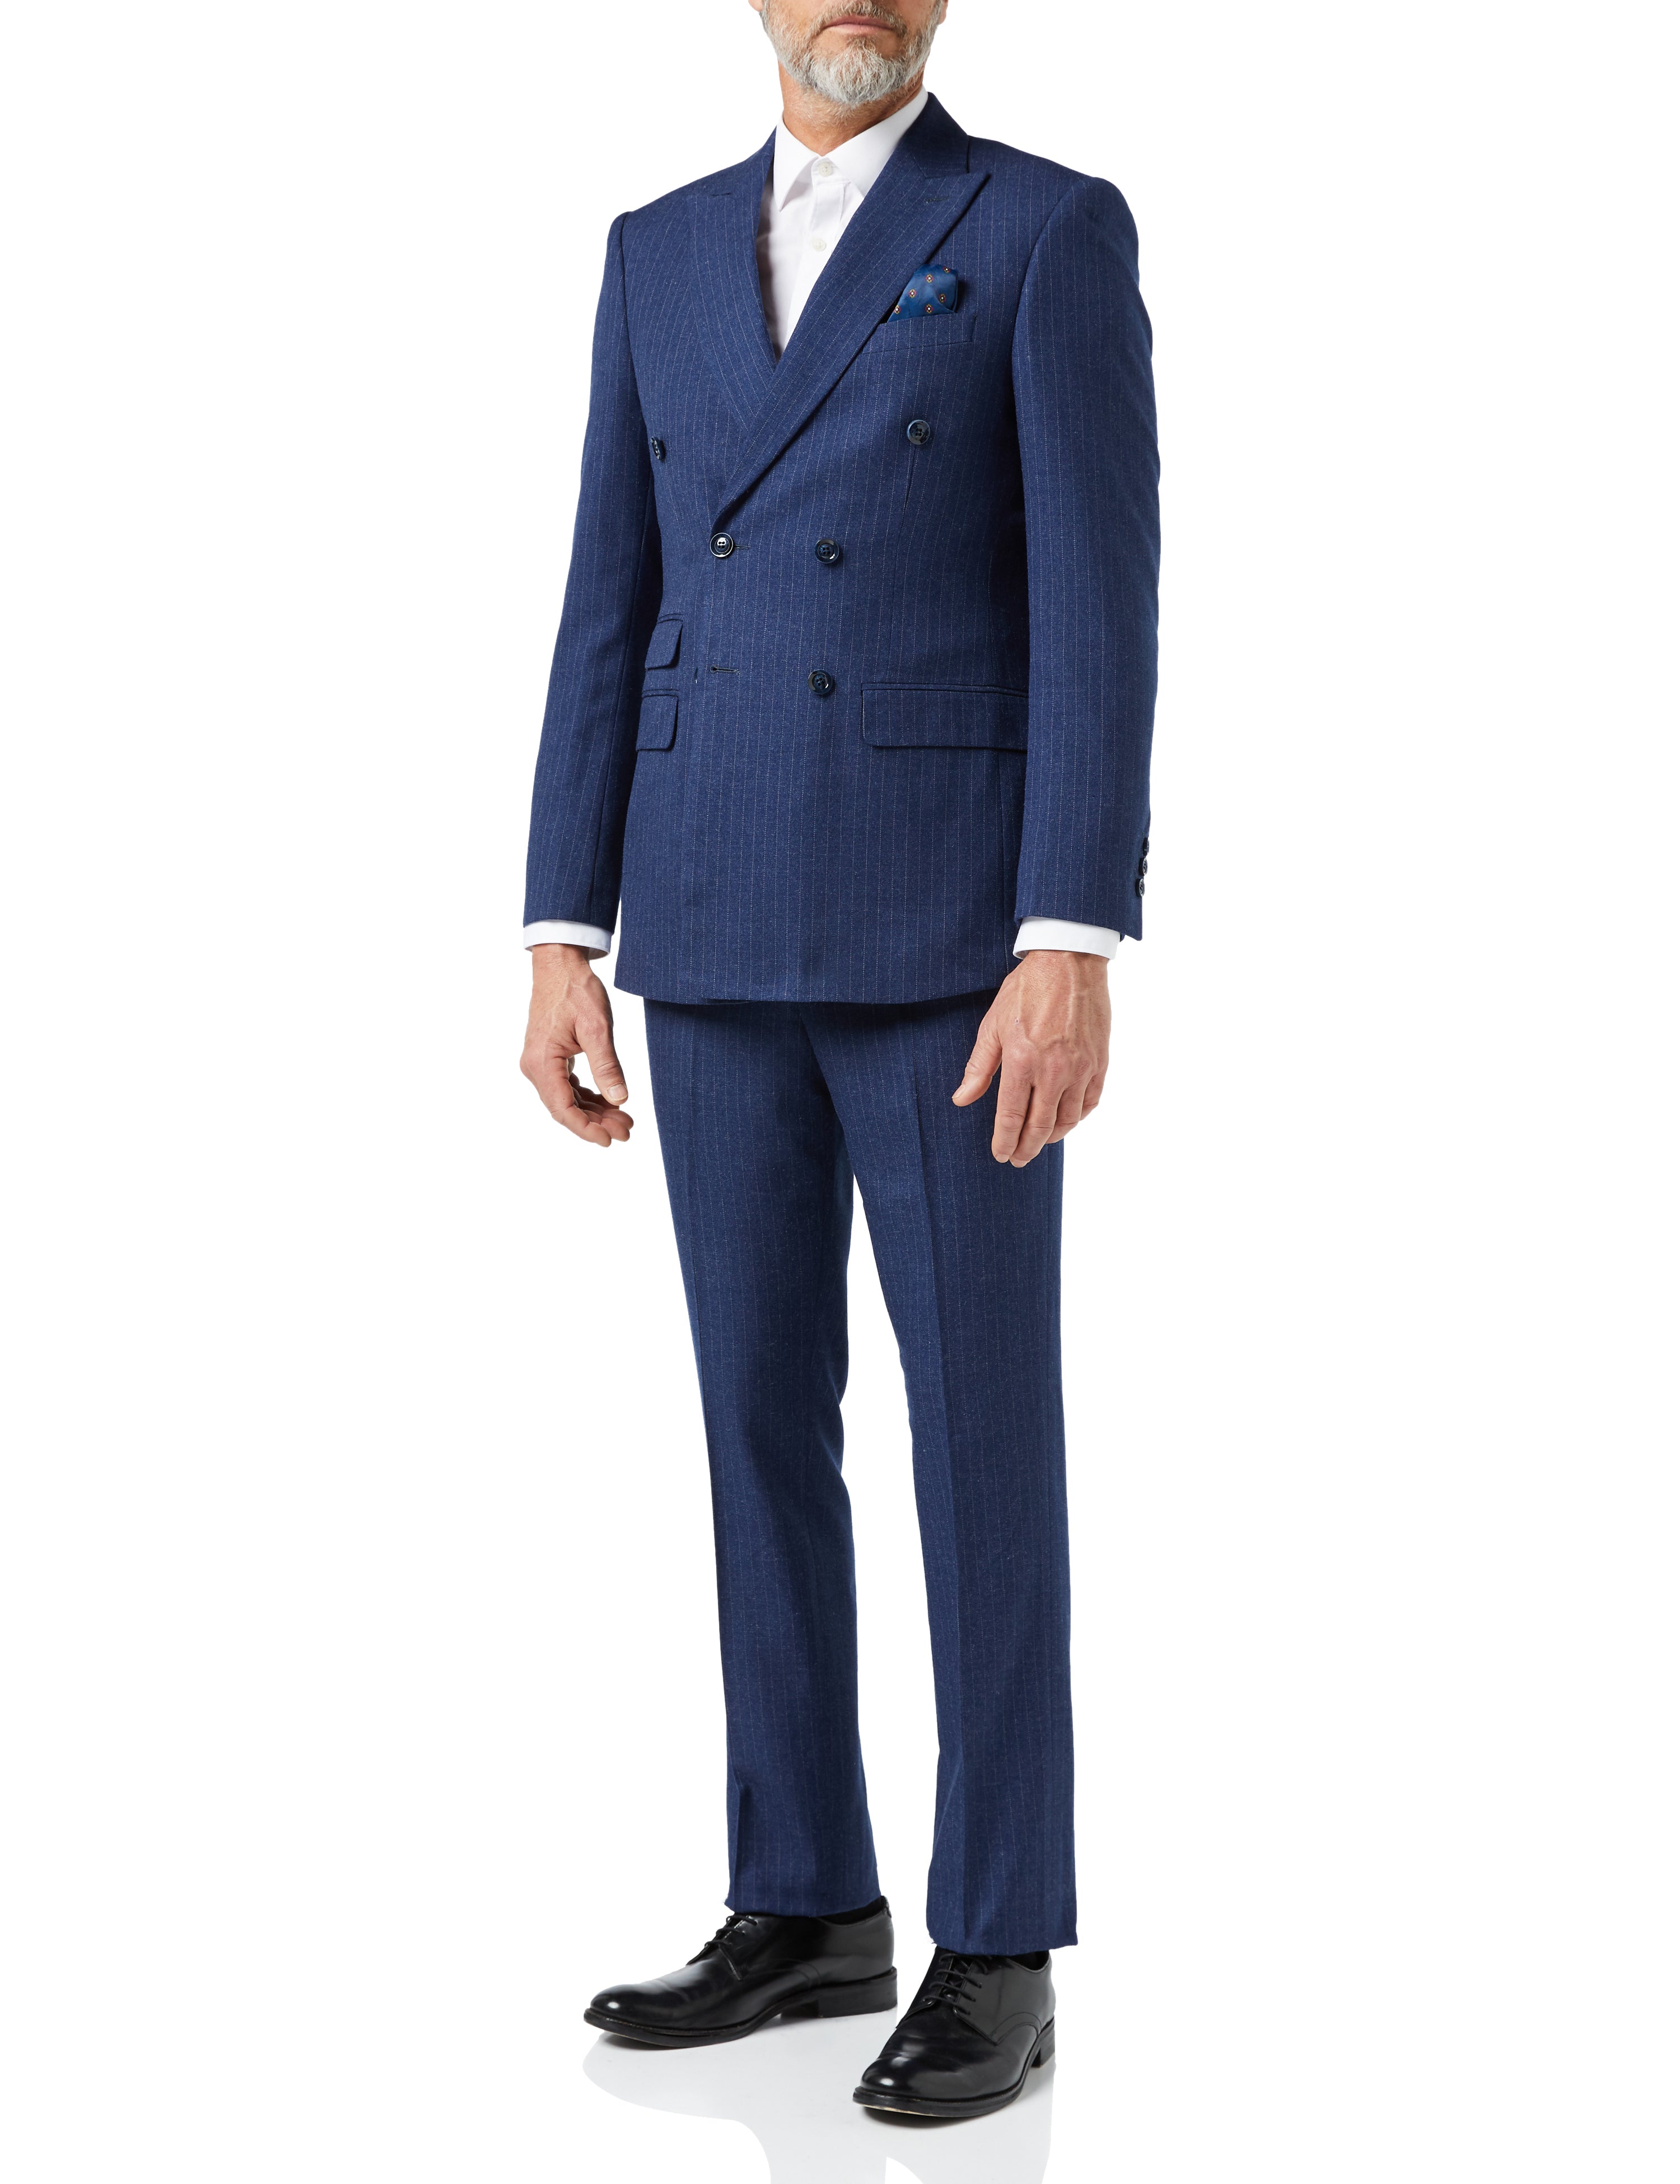 Mens 3 Piece Double Breasted Suit Blue Pinstripe 1920 Retro Gatsby Tailored Fit